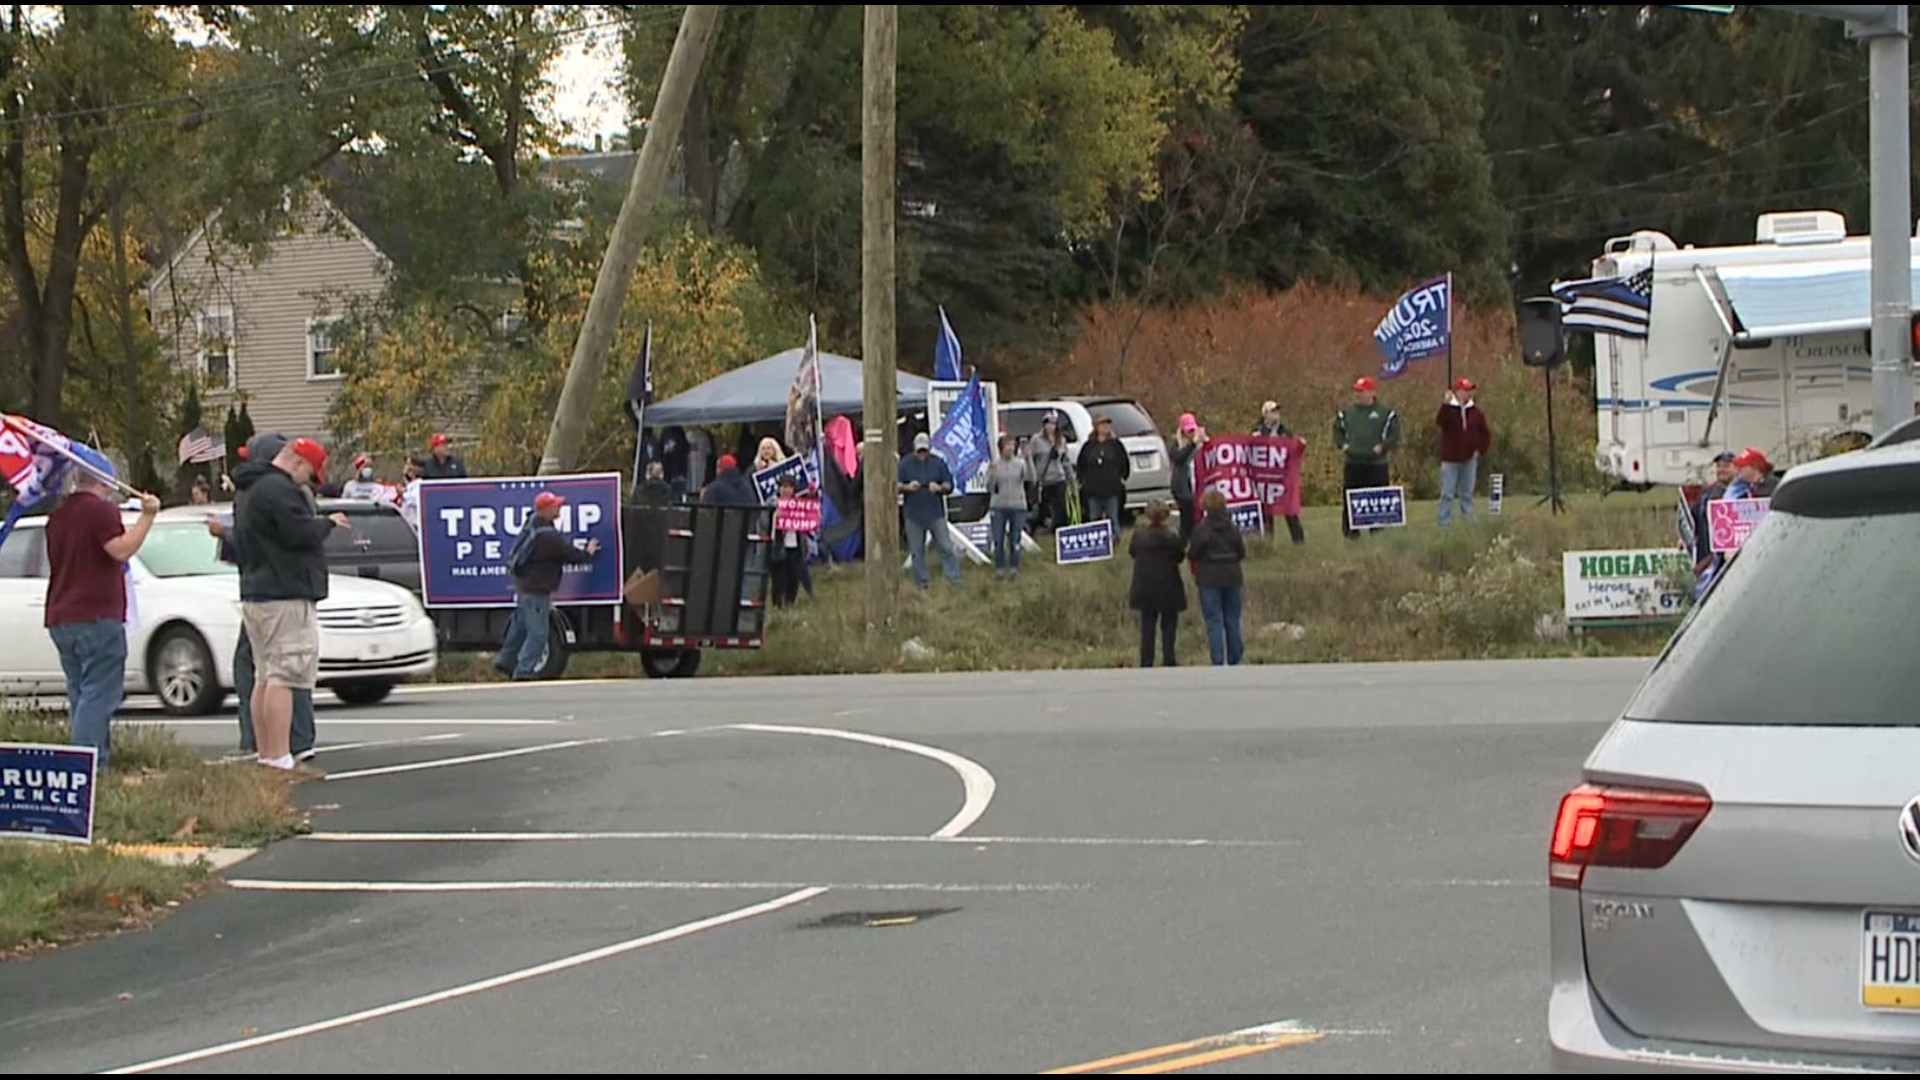 The rally was hosted by the Republican Party of Luzerne County.